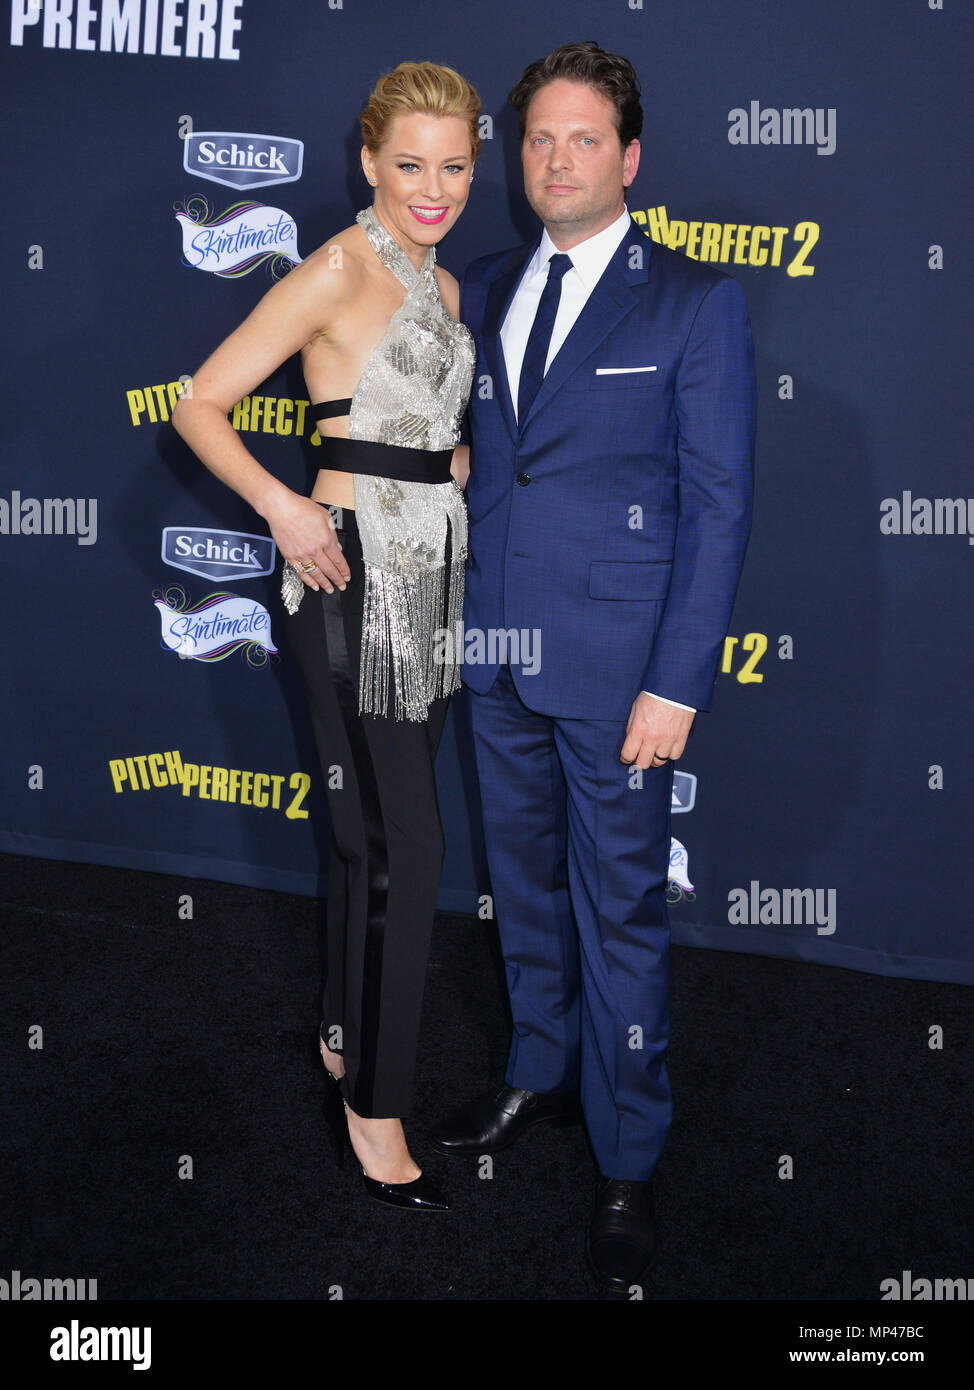 Elizabeth Banks, Max Handelman 041 at the Pitch Perfect 2 Premiere at the Nokia Theatre in Los Angeles. May 8, 2015. Elizabeth Banks, Max Handelman 041 ------------- Red Carpet Event, Vertical, USA, Film Industry, Celebrities,  Photography, Bestof, Arts Culture and Entertainment, Topix Celebrities fashion /  Vertical, Best of, Event in Hollywood Life - California,  Red Carpet and backstage, USA, Film Industry, Celebrities,  movie celebrities, TV celebrities, Music celebrities, Photography, Bestof, Arts Culture and Entertainment,  Topix, vertical,  family from from the year , 2015, inquiry tsun Stock Photo